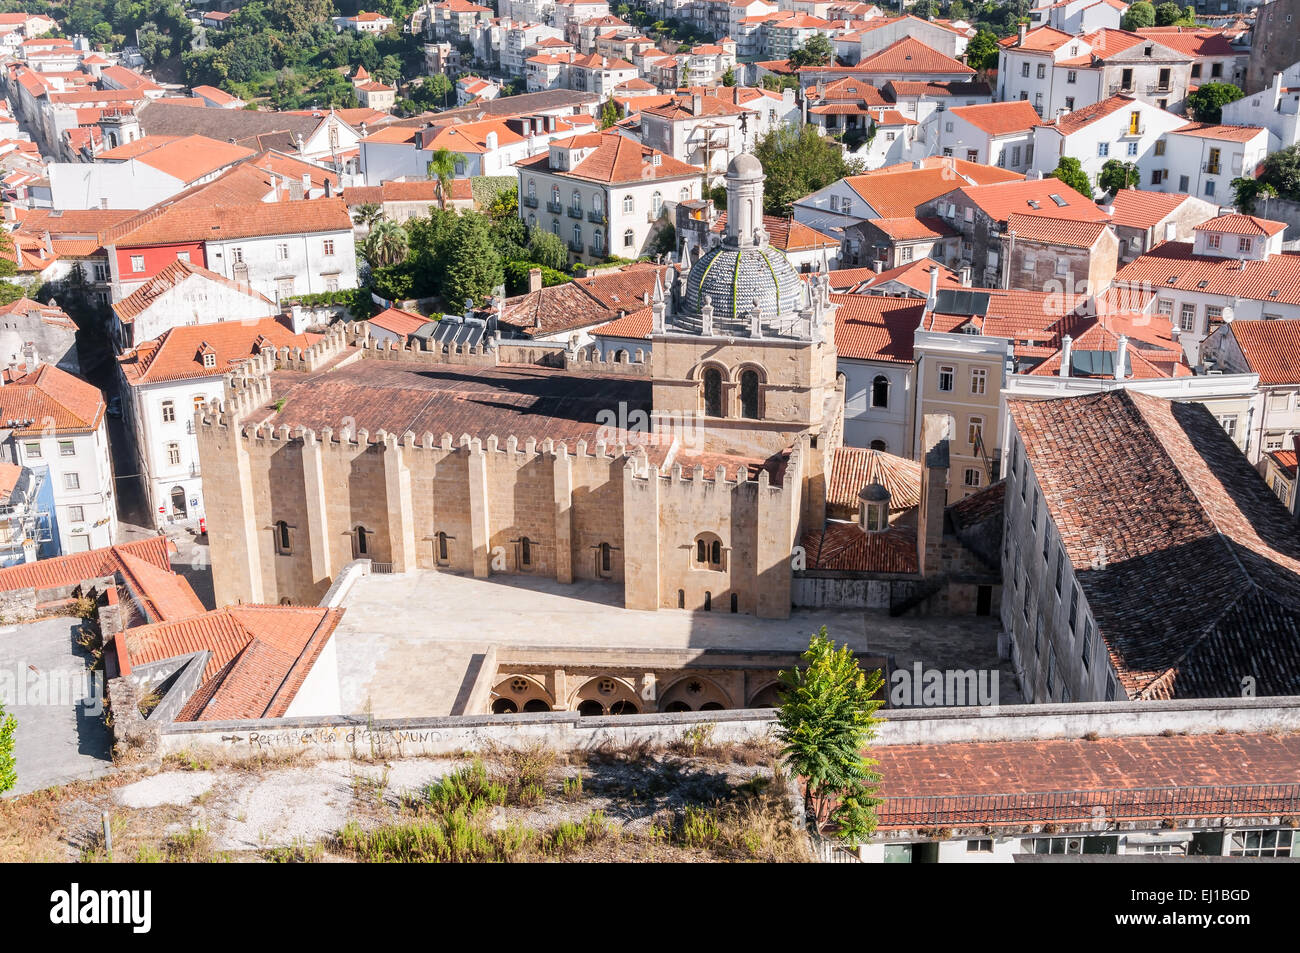 View of the Old Cathedral of Coimbra, Portugal Stock Photo